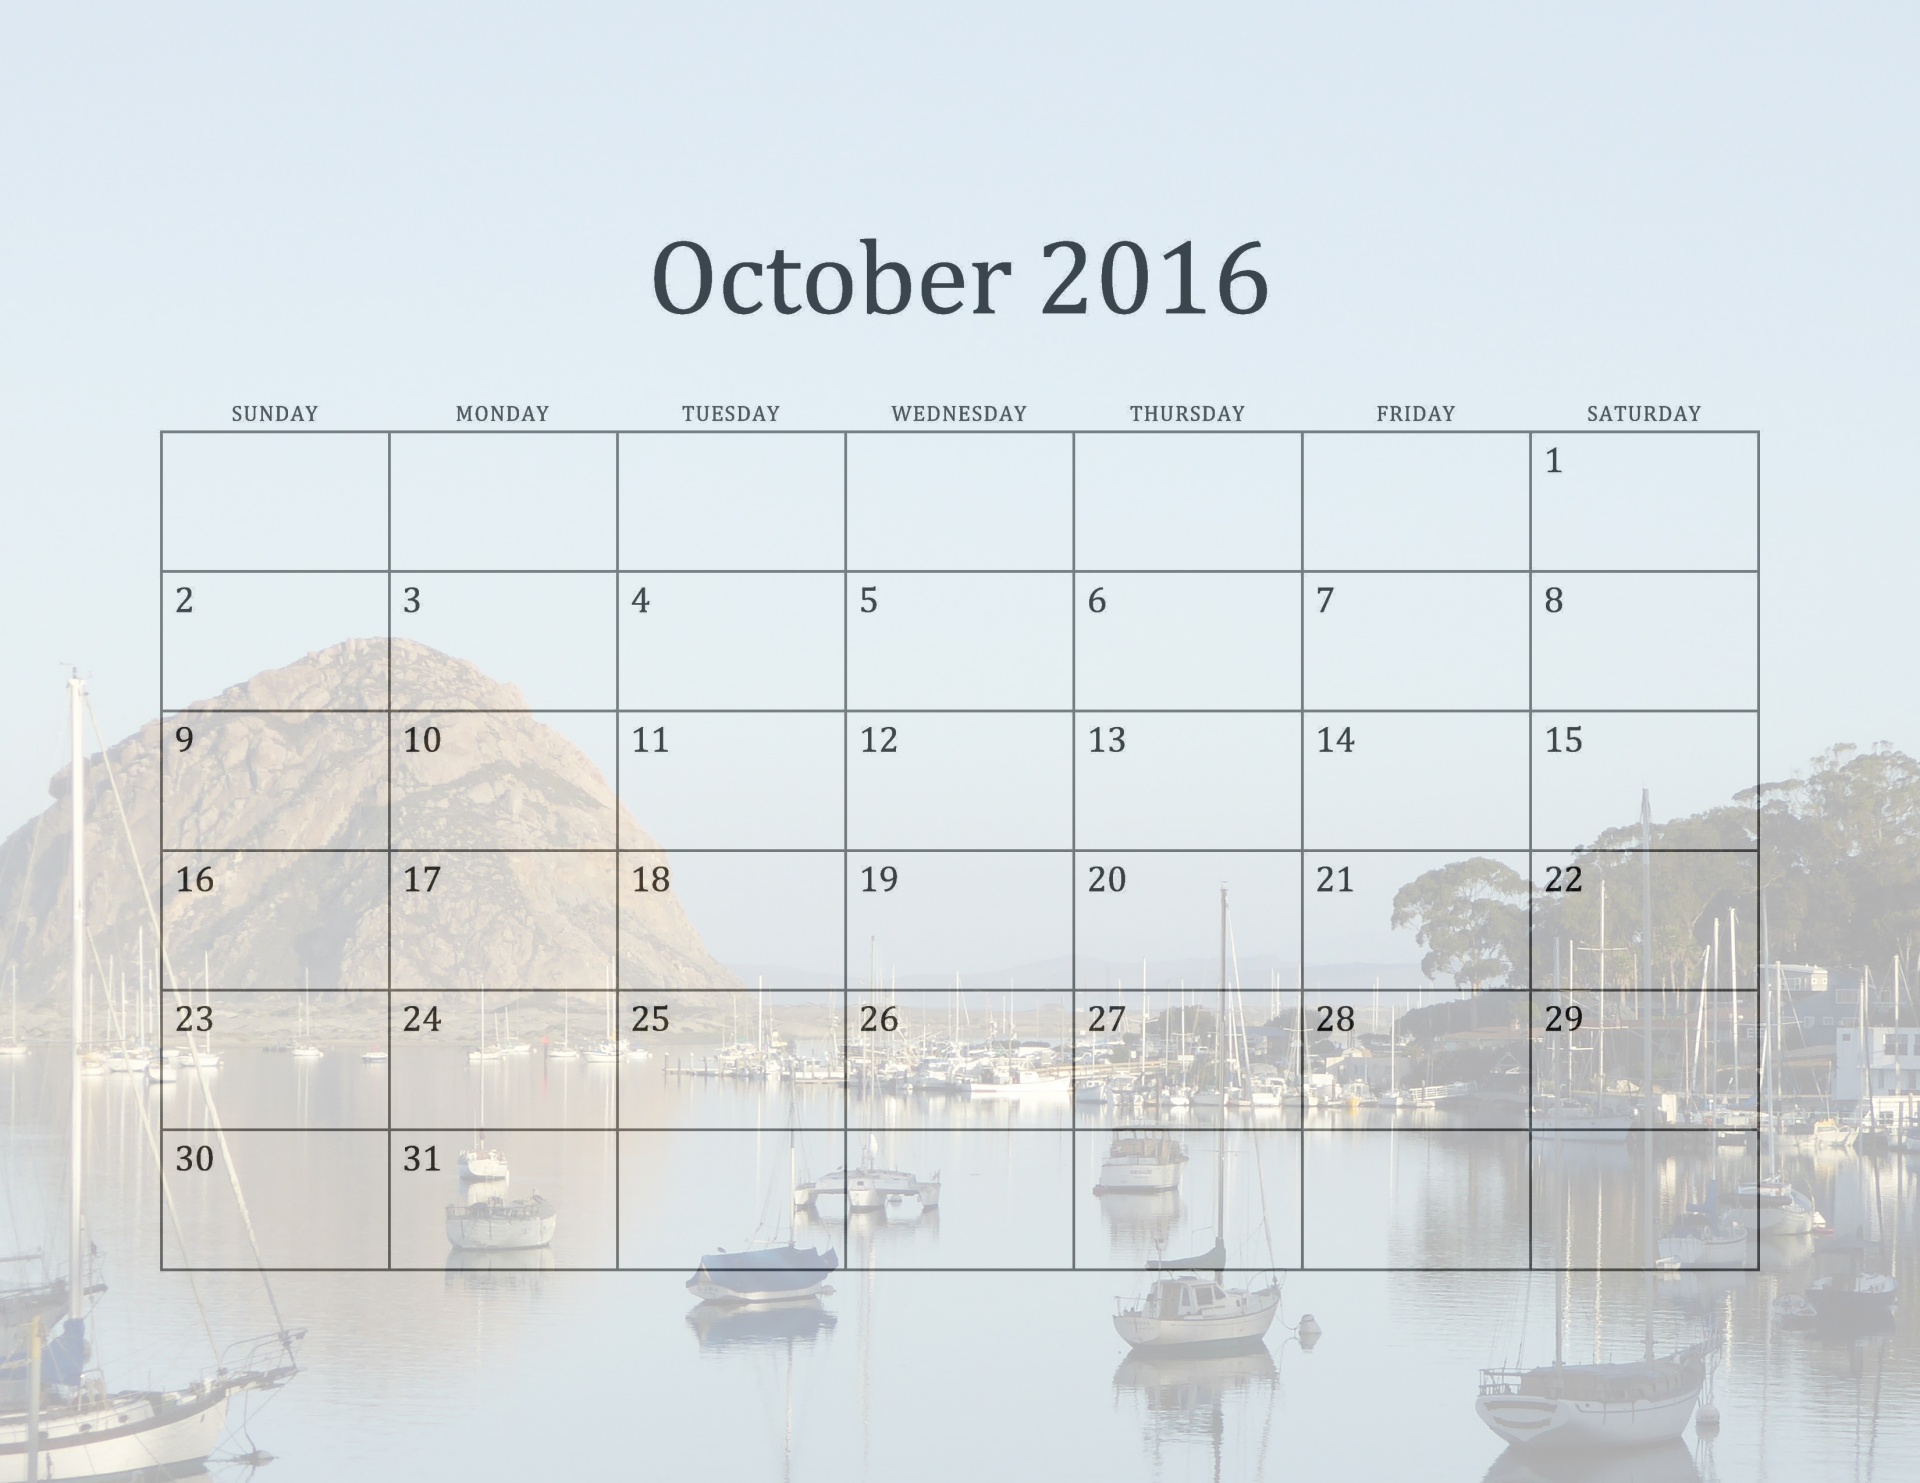 Calendar for October 2016 with California Beaches in the background. October shows boats in the Morro Bay Harbor with the magnificent Morro Rock in the background